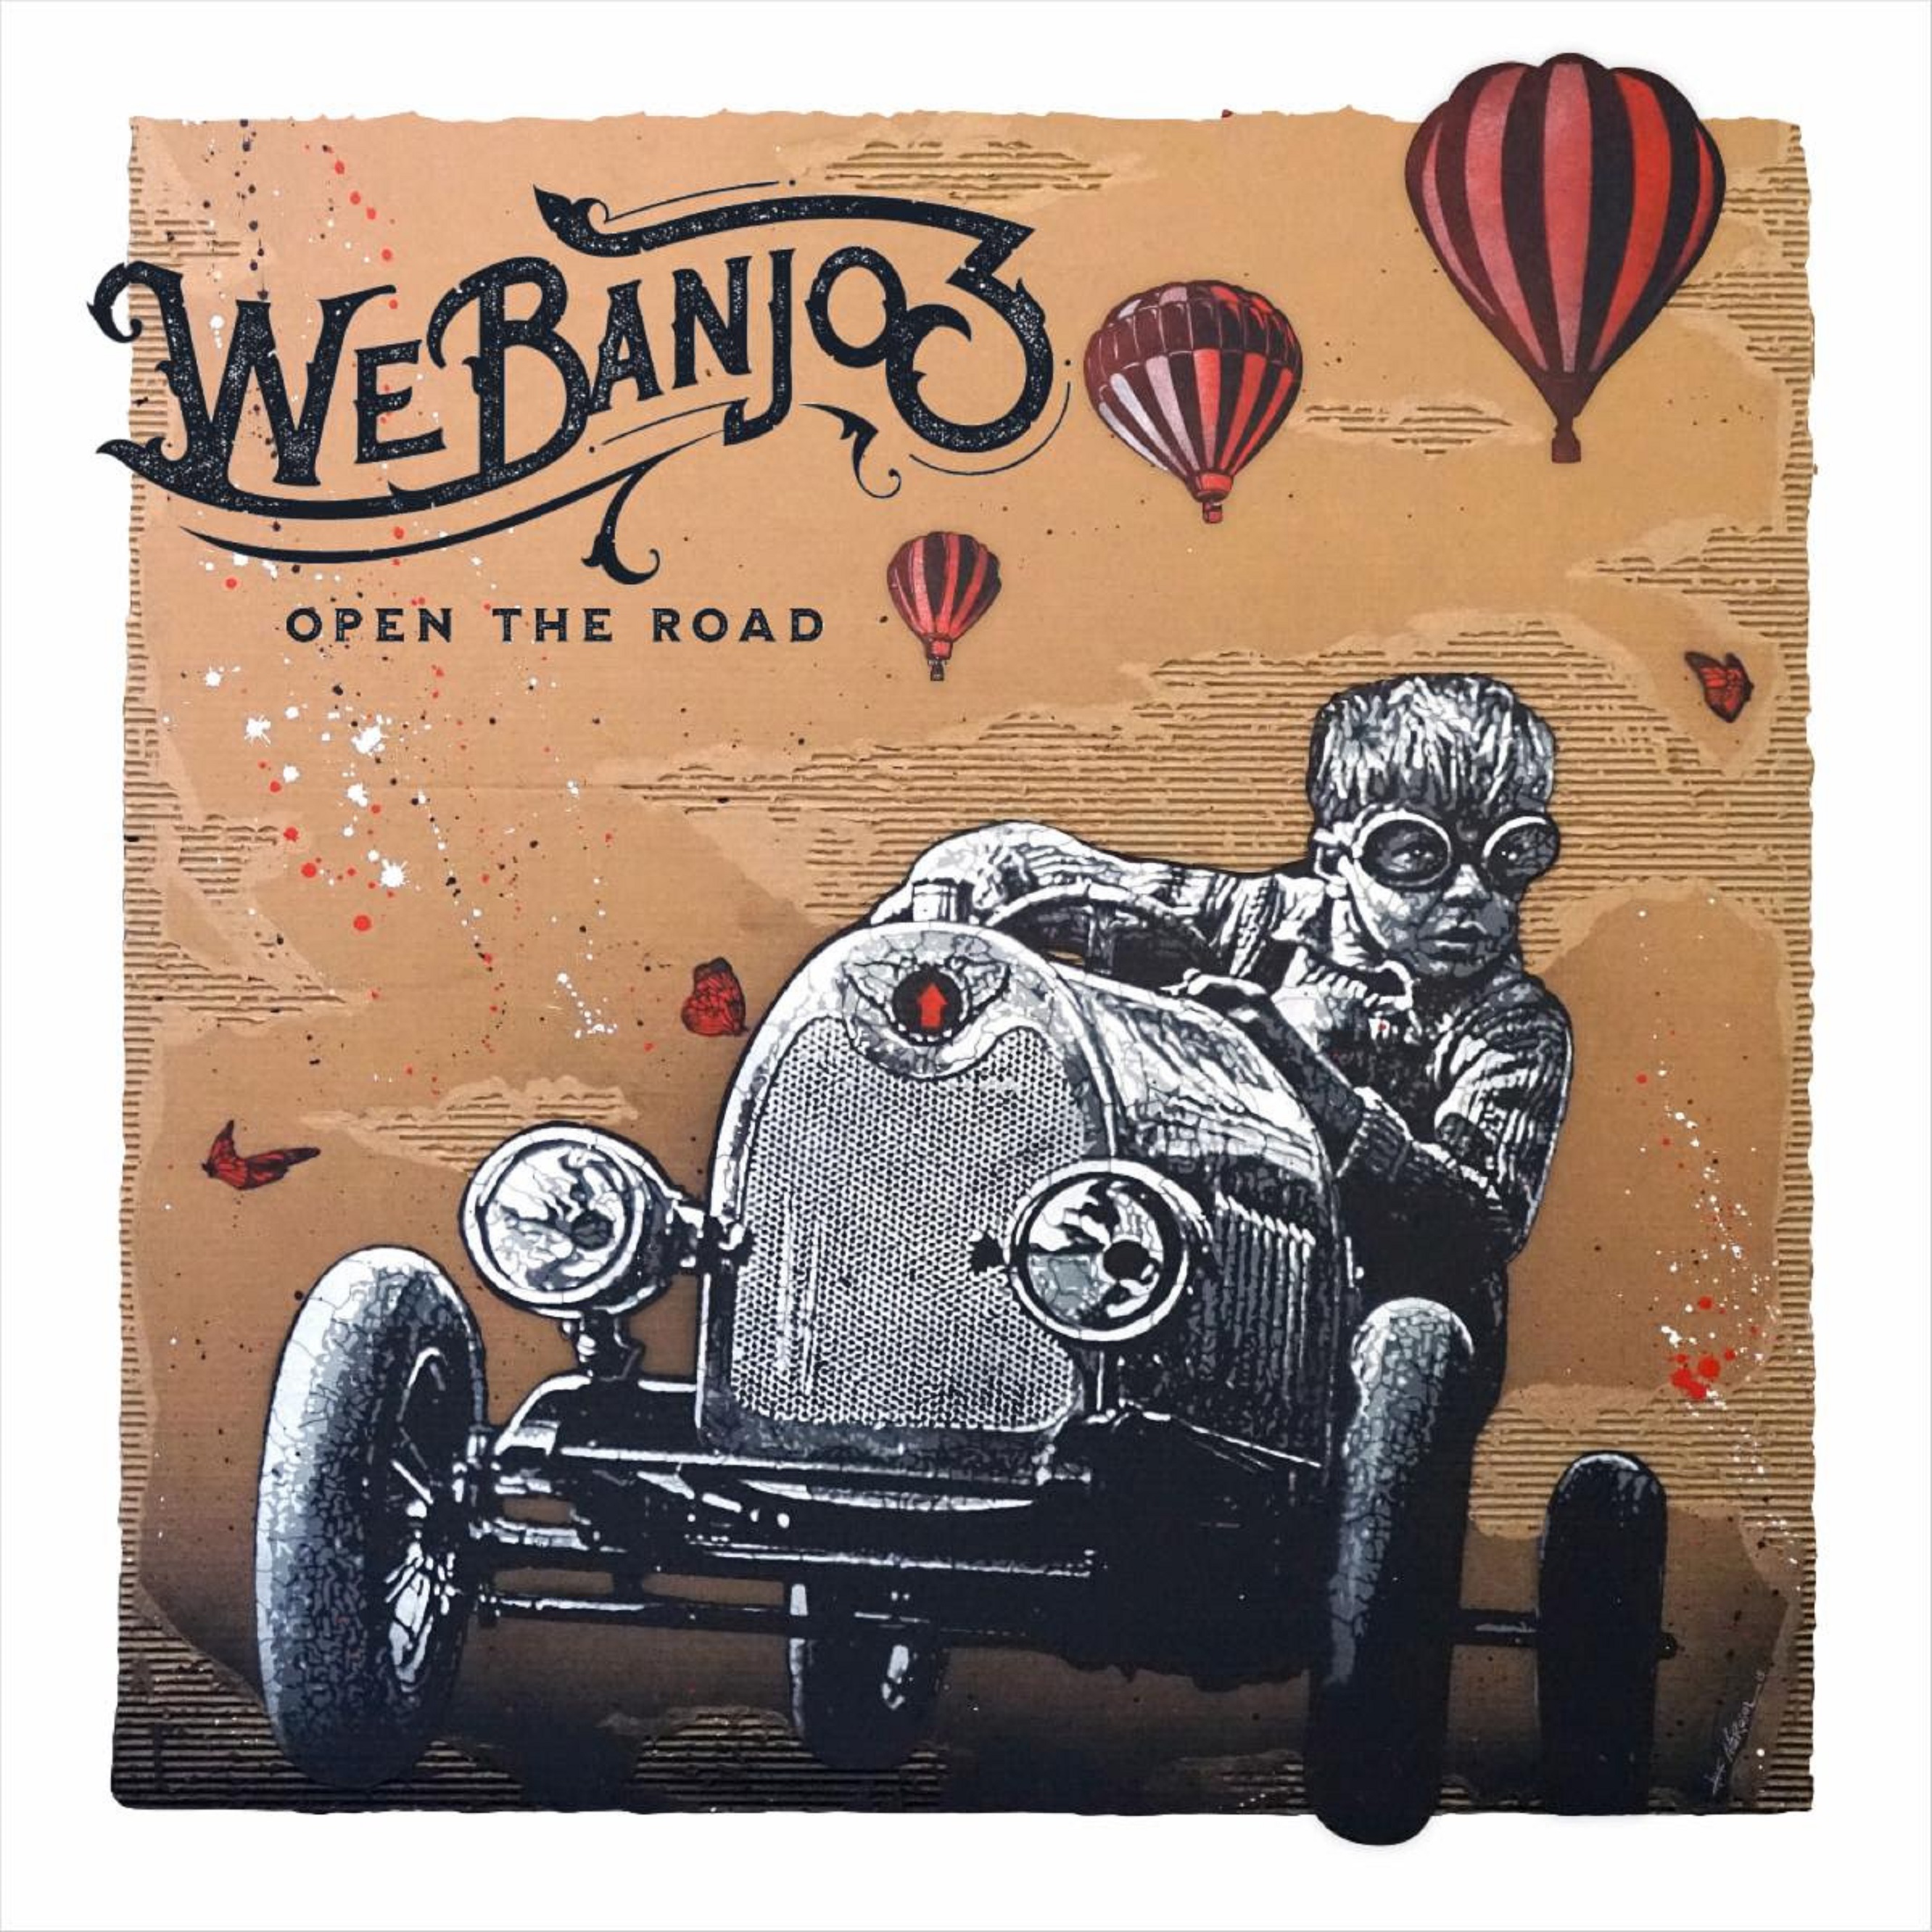 We Banjo 3 Further Cement Their Place As Trans-Atlantic String Band Troubadours With New Album "Open The Road"